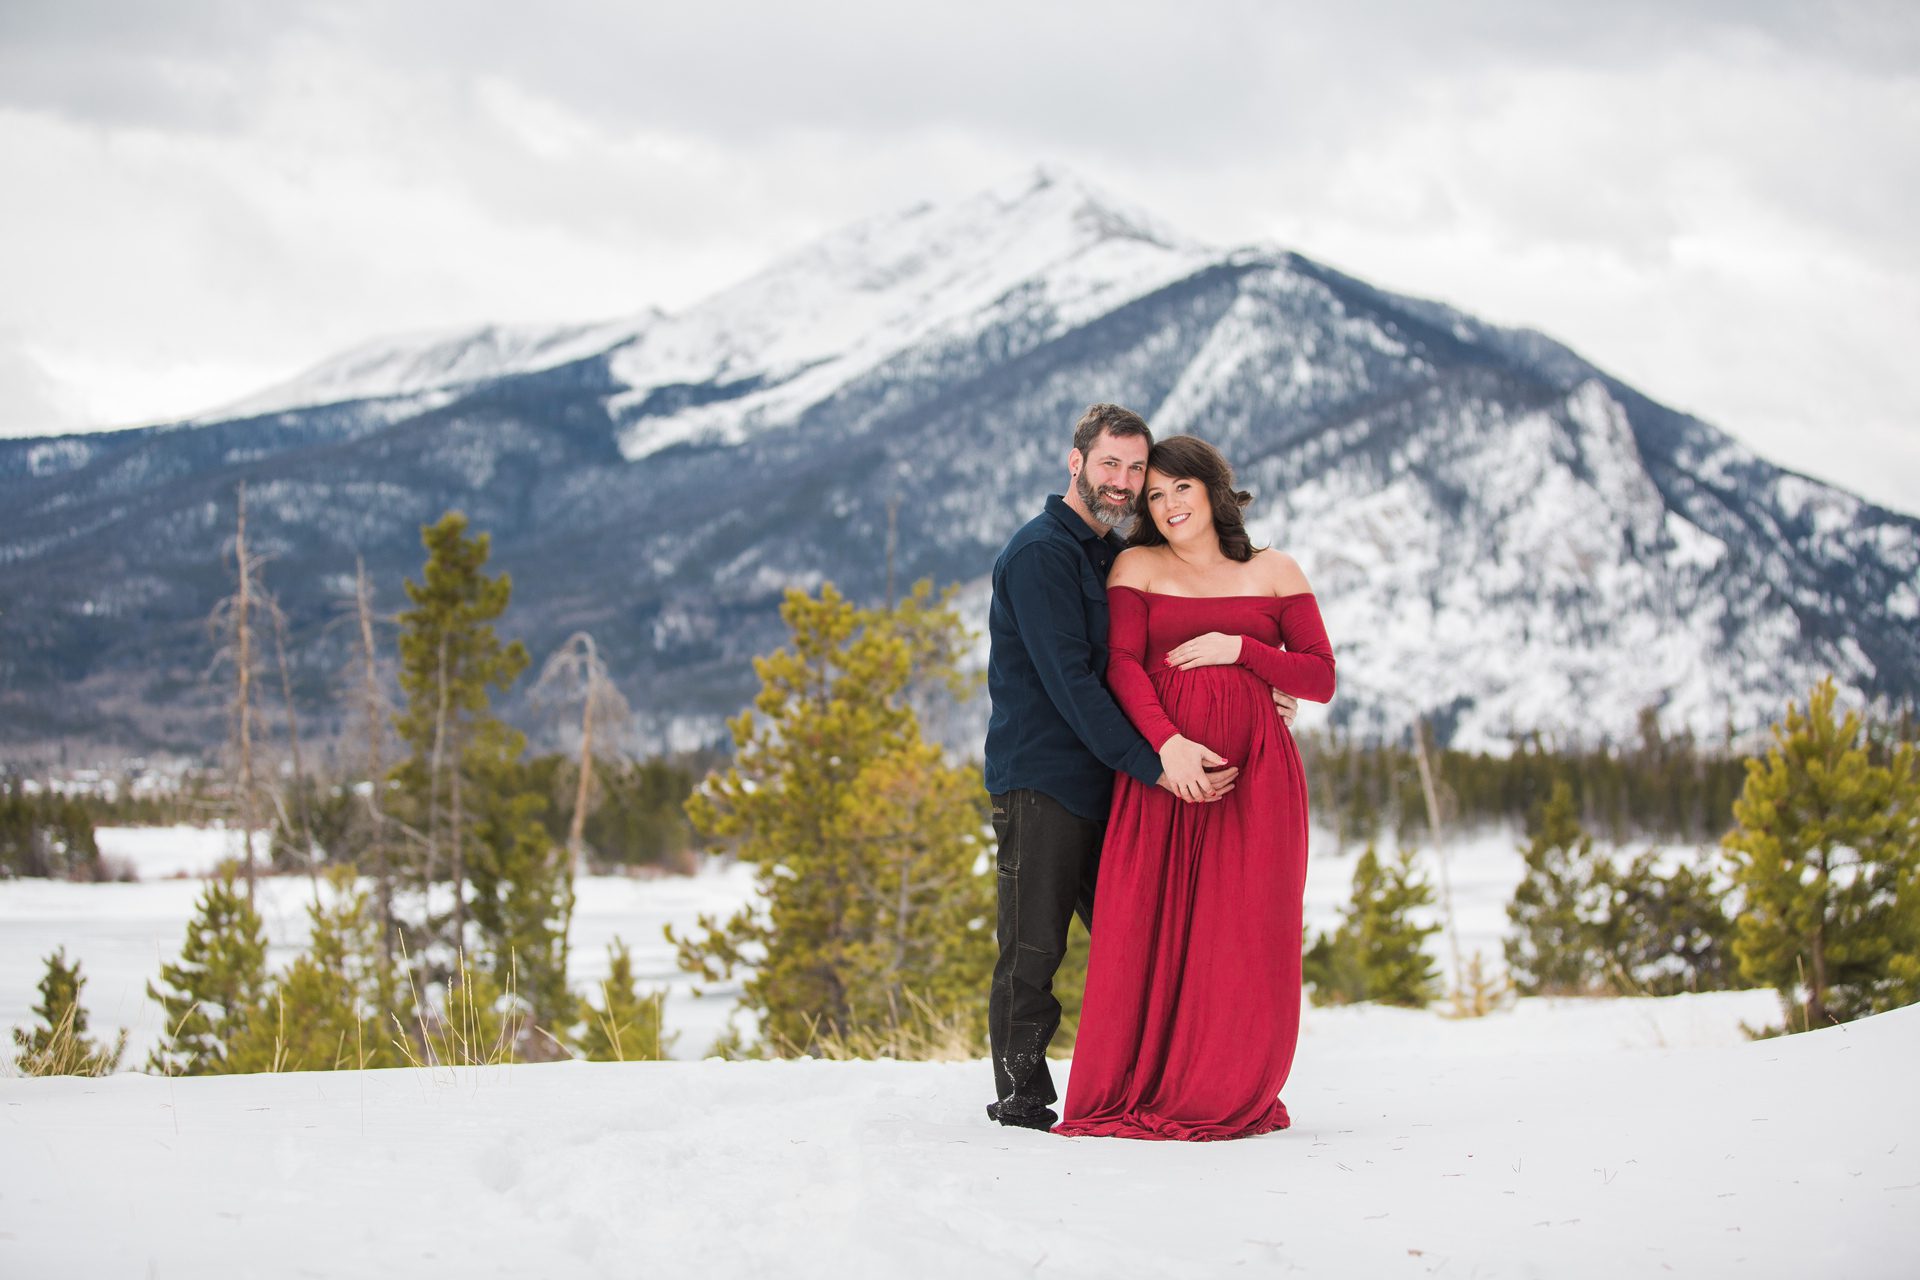 denver maternity photographer, dillion maternity photos, mountain maternity photos, maternity photos, maternity photographer, colorado family photographer, colorado maternity photos, baby bump photos, pregnancy photos, pregnancy photography, sew trendy accessory, red maternity dress, couples maternity session